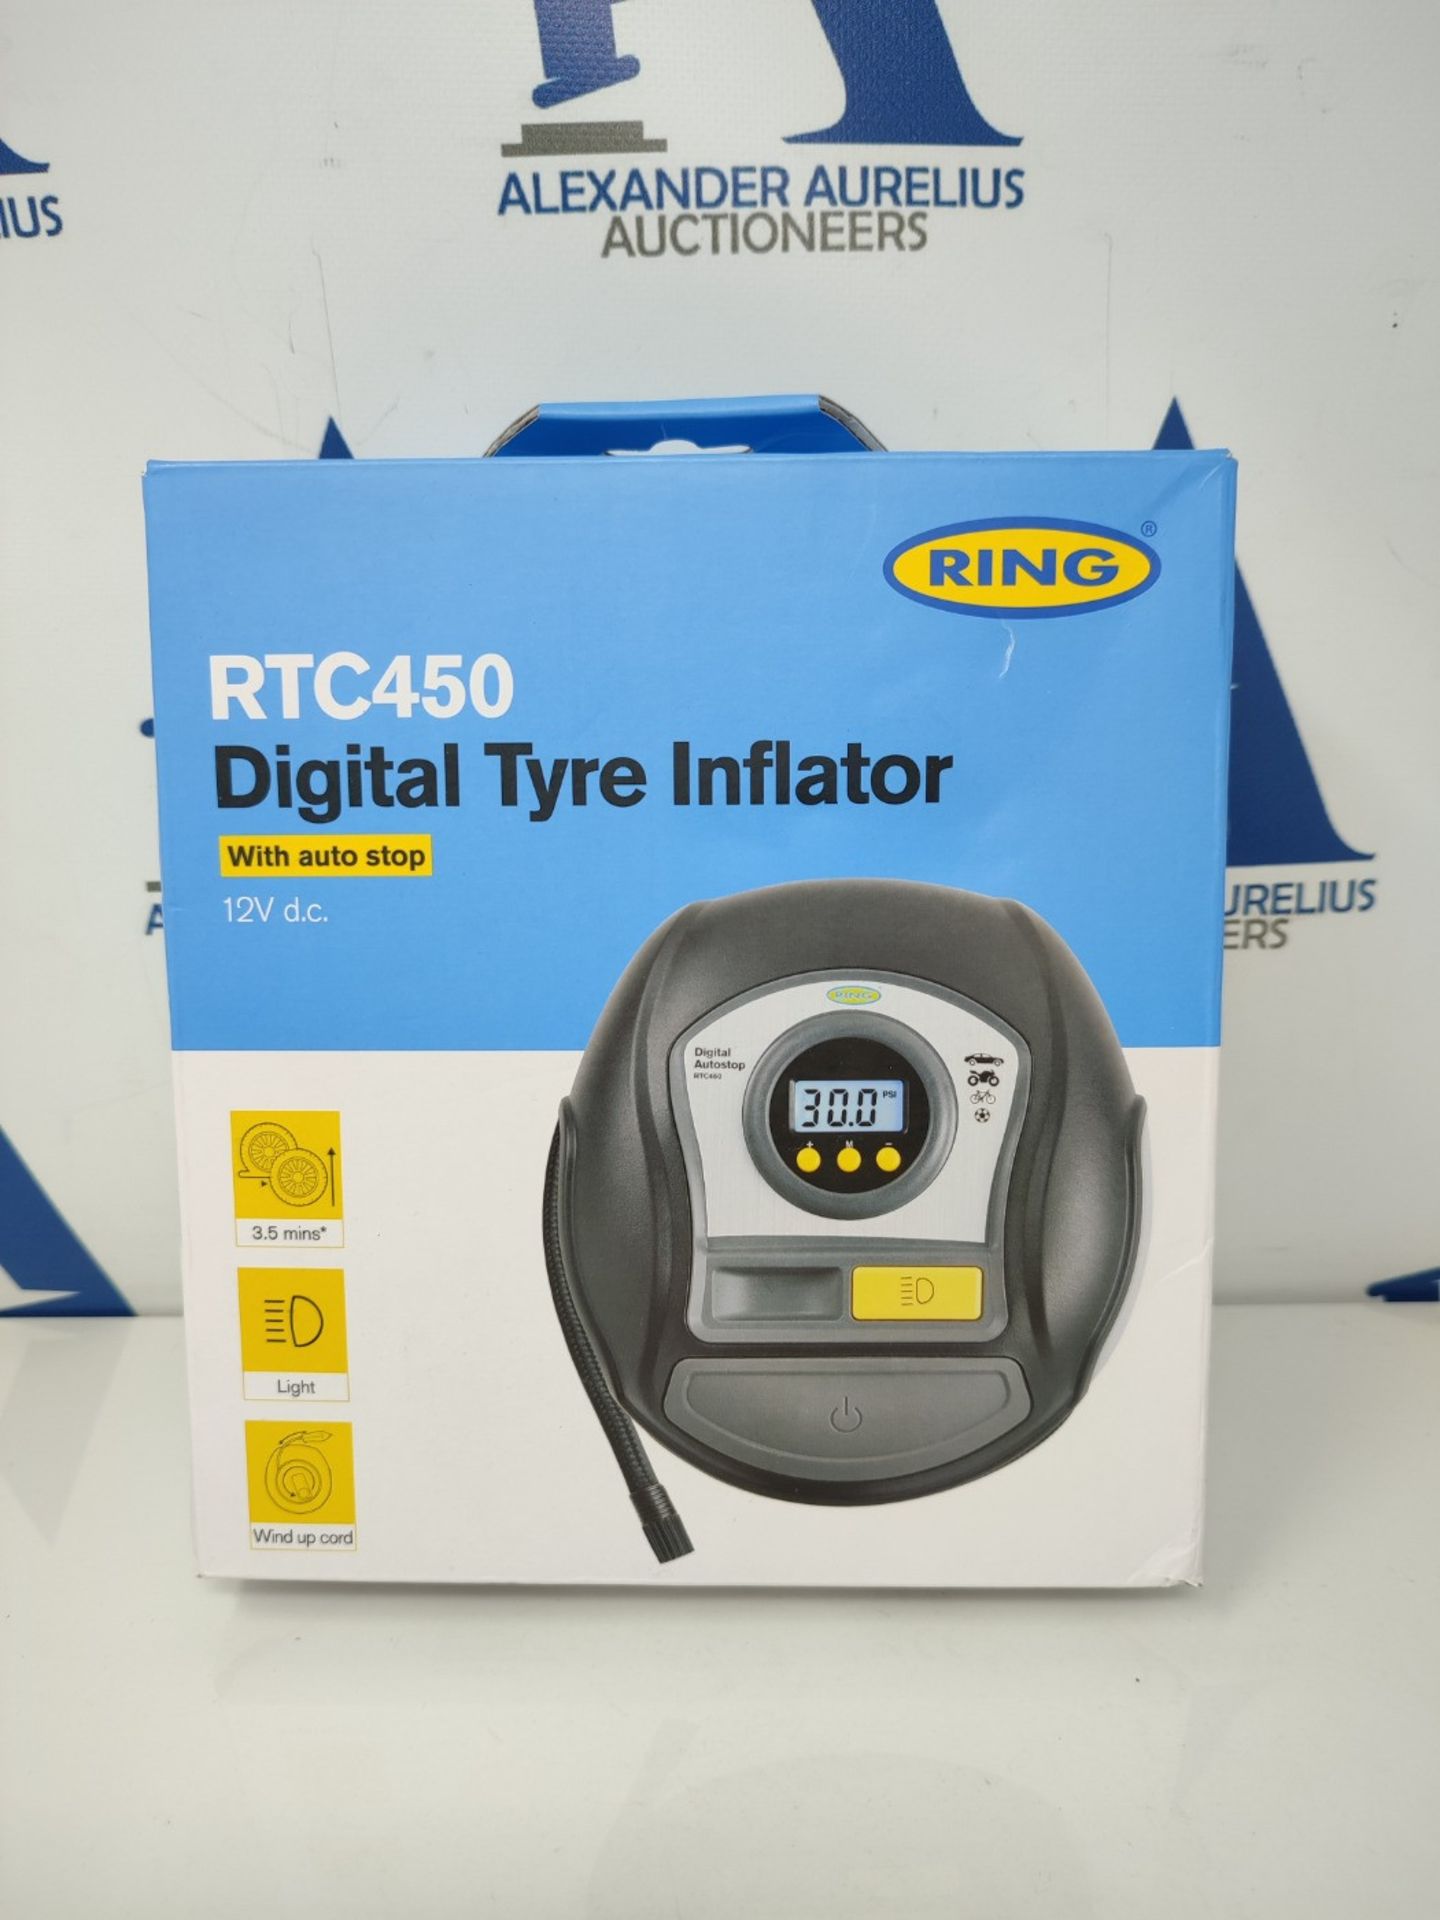 Ring Automotive - RTC450 Digital Tyre Inflator with Auto Stop, Memory, LED Light, Back - Image 11 of 12